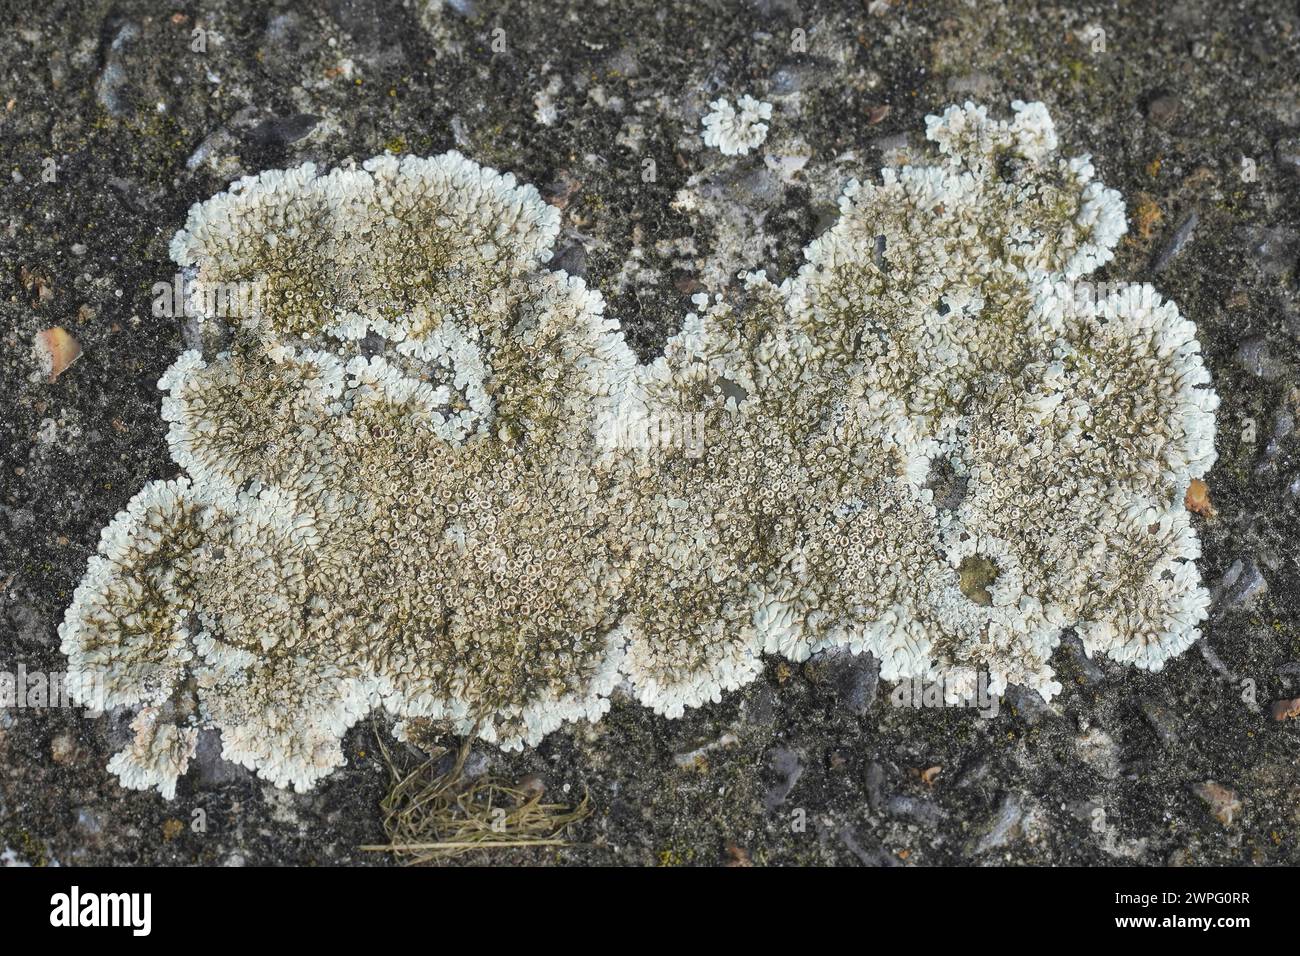 Natural closeup on a white lichen species growing on stone, Lecanora muralis Stock Photo